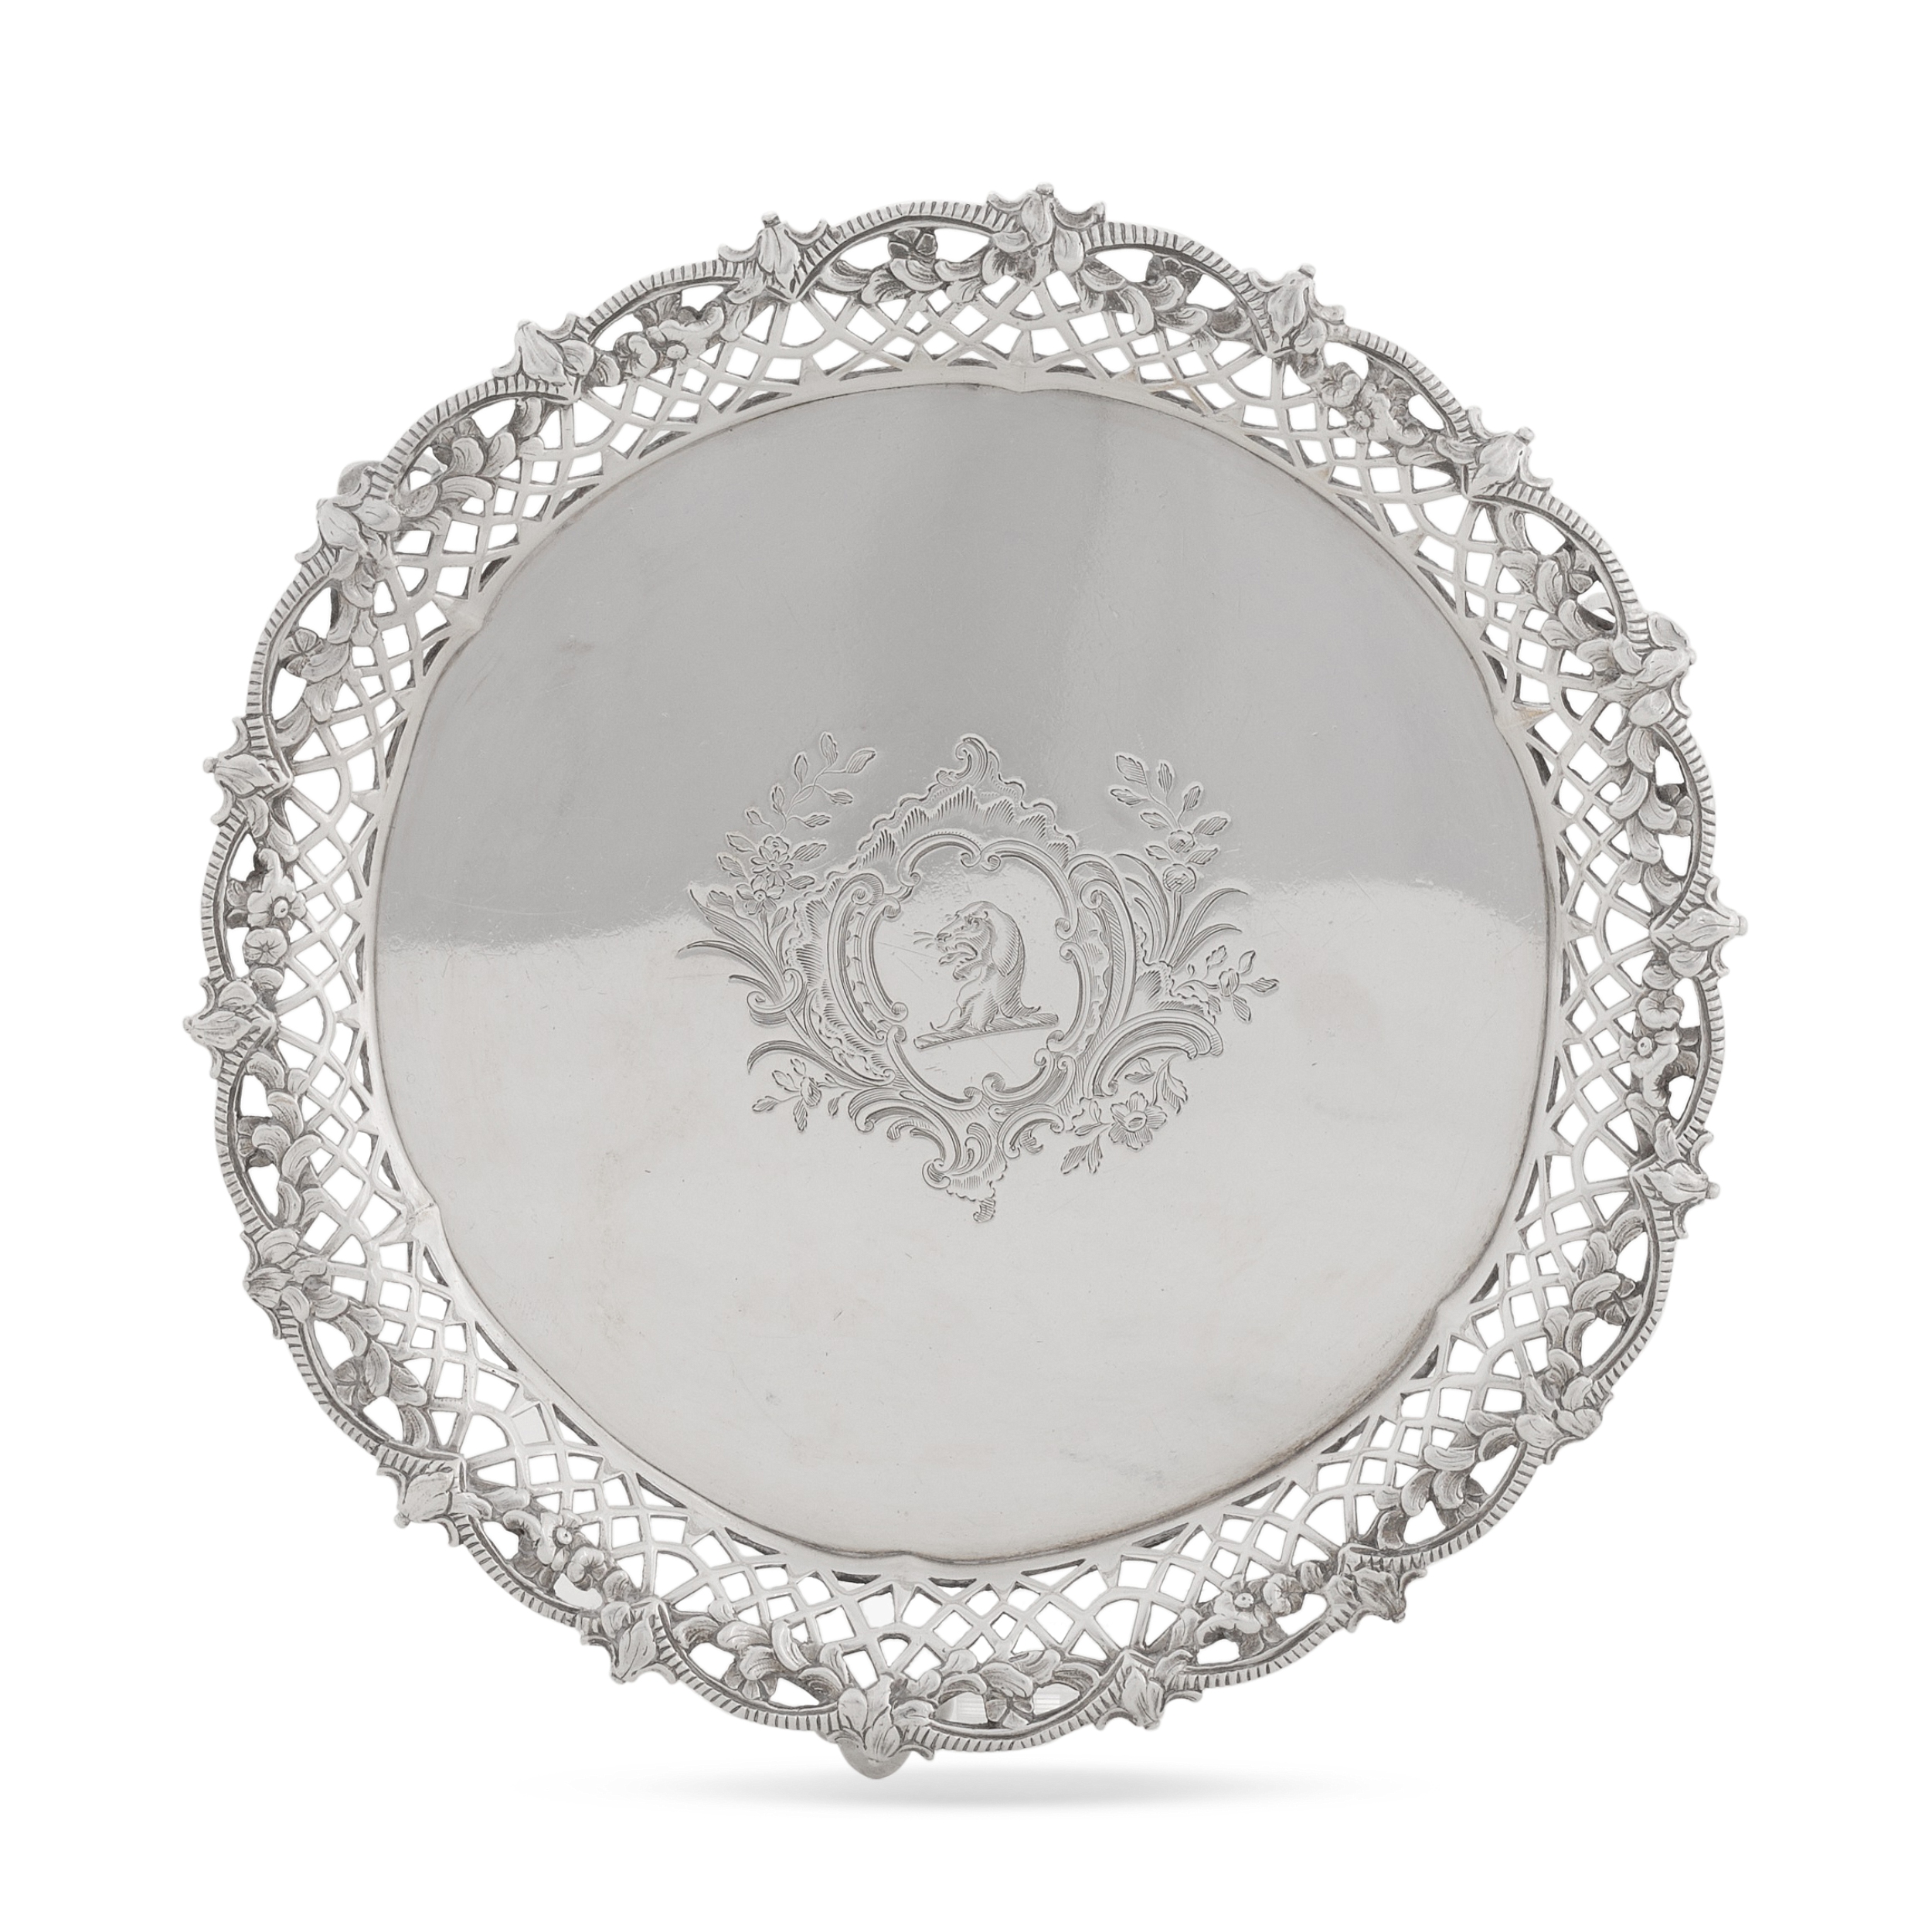 A suite of George II silver waiters and salver, Herne & Butty, London, 1758 - Image 3 of 5